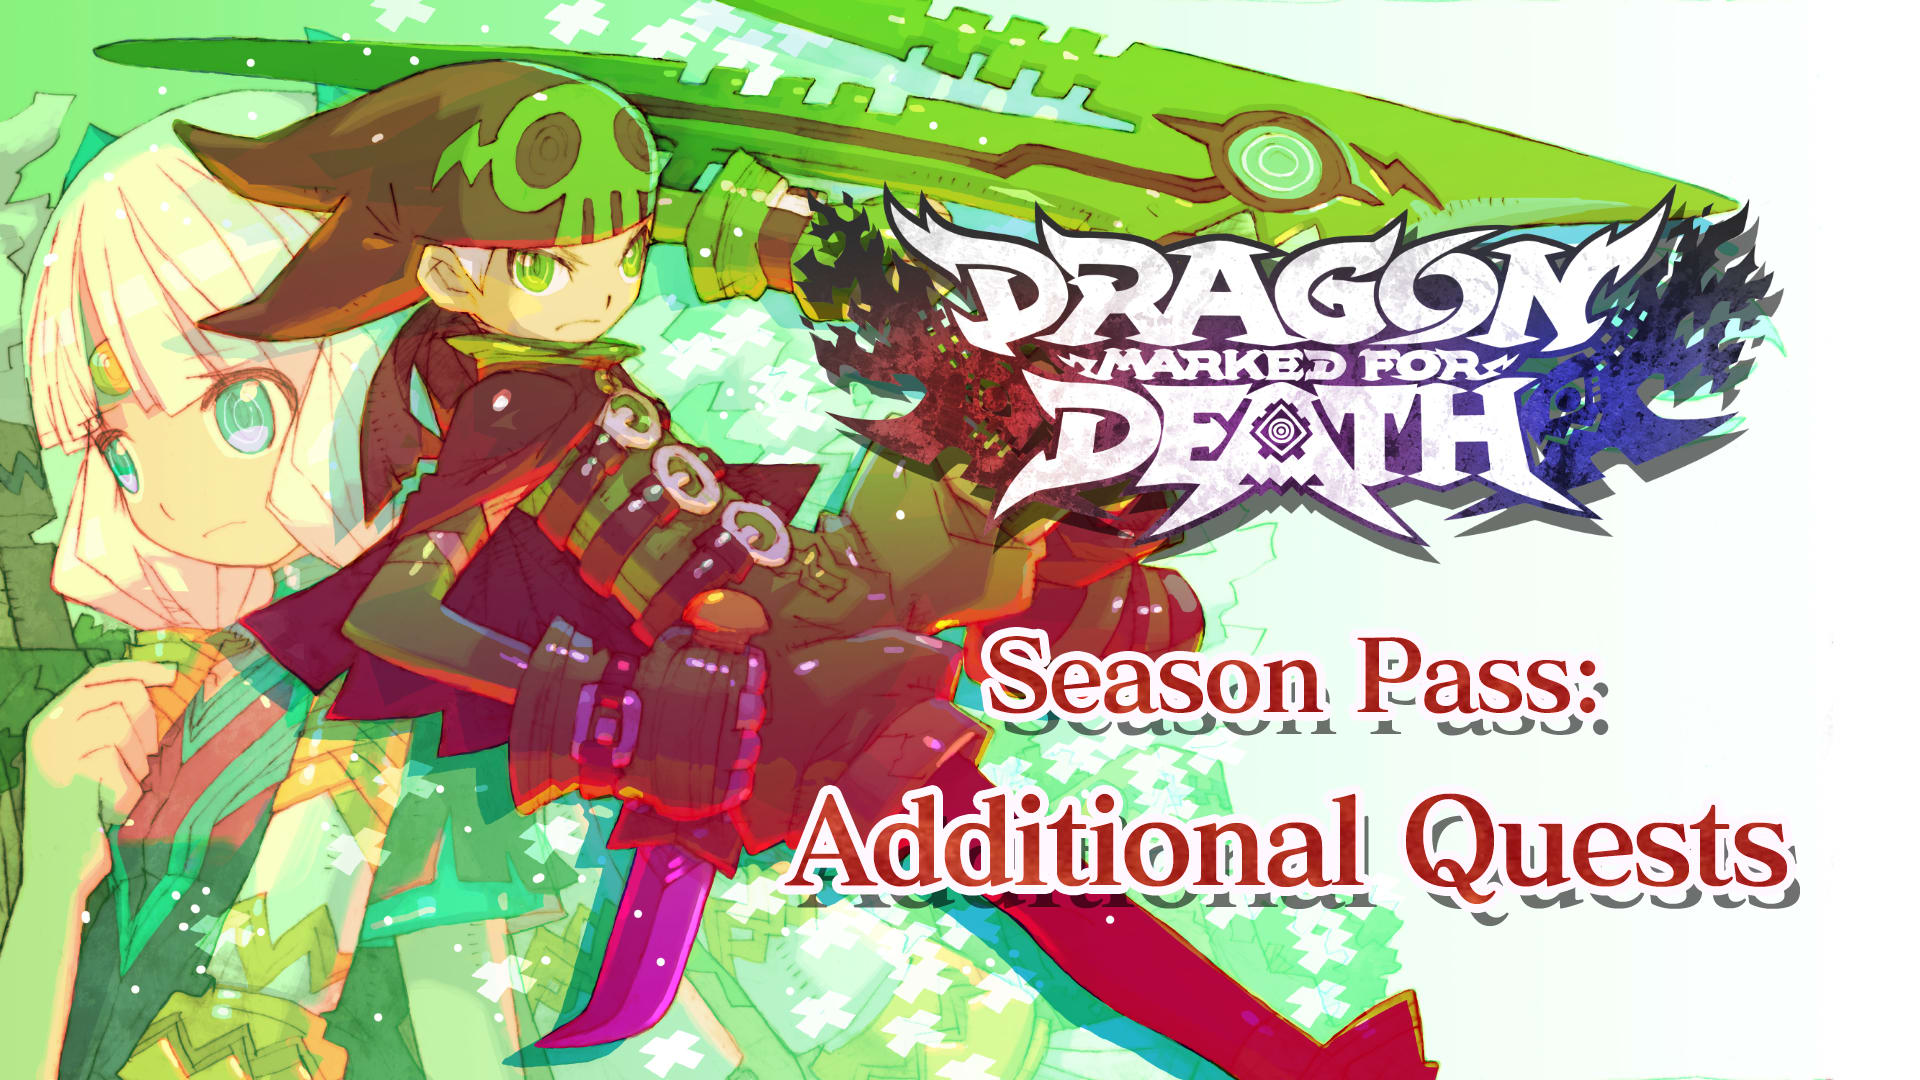 Season Pass: Additional Quests